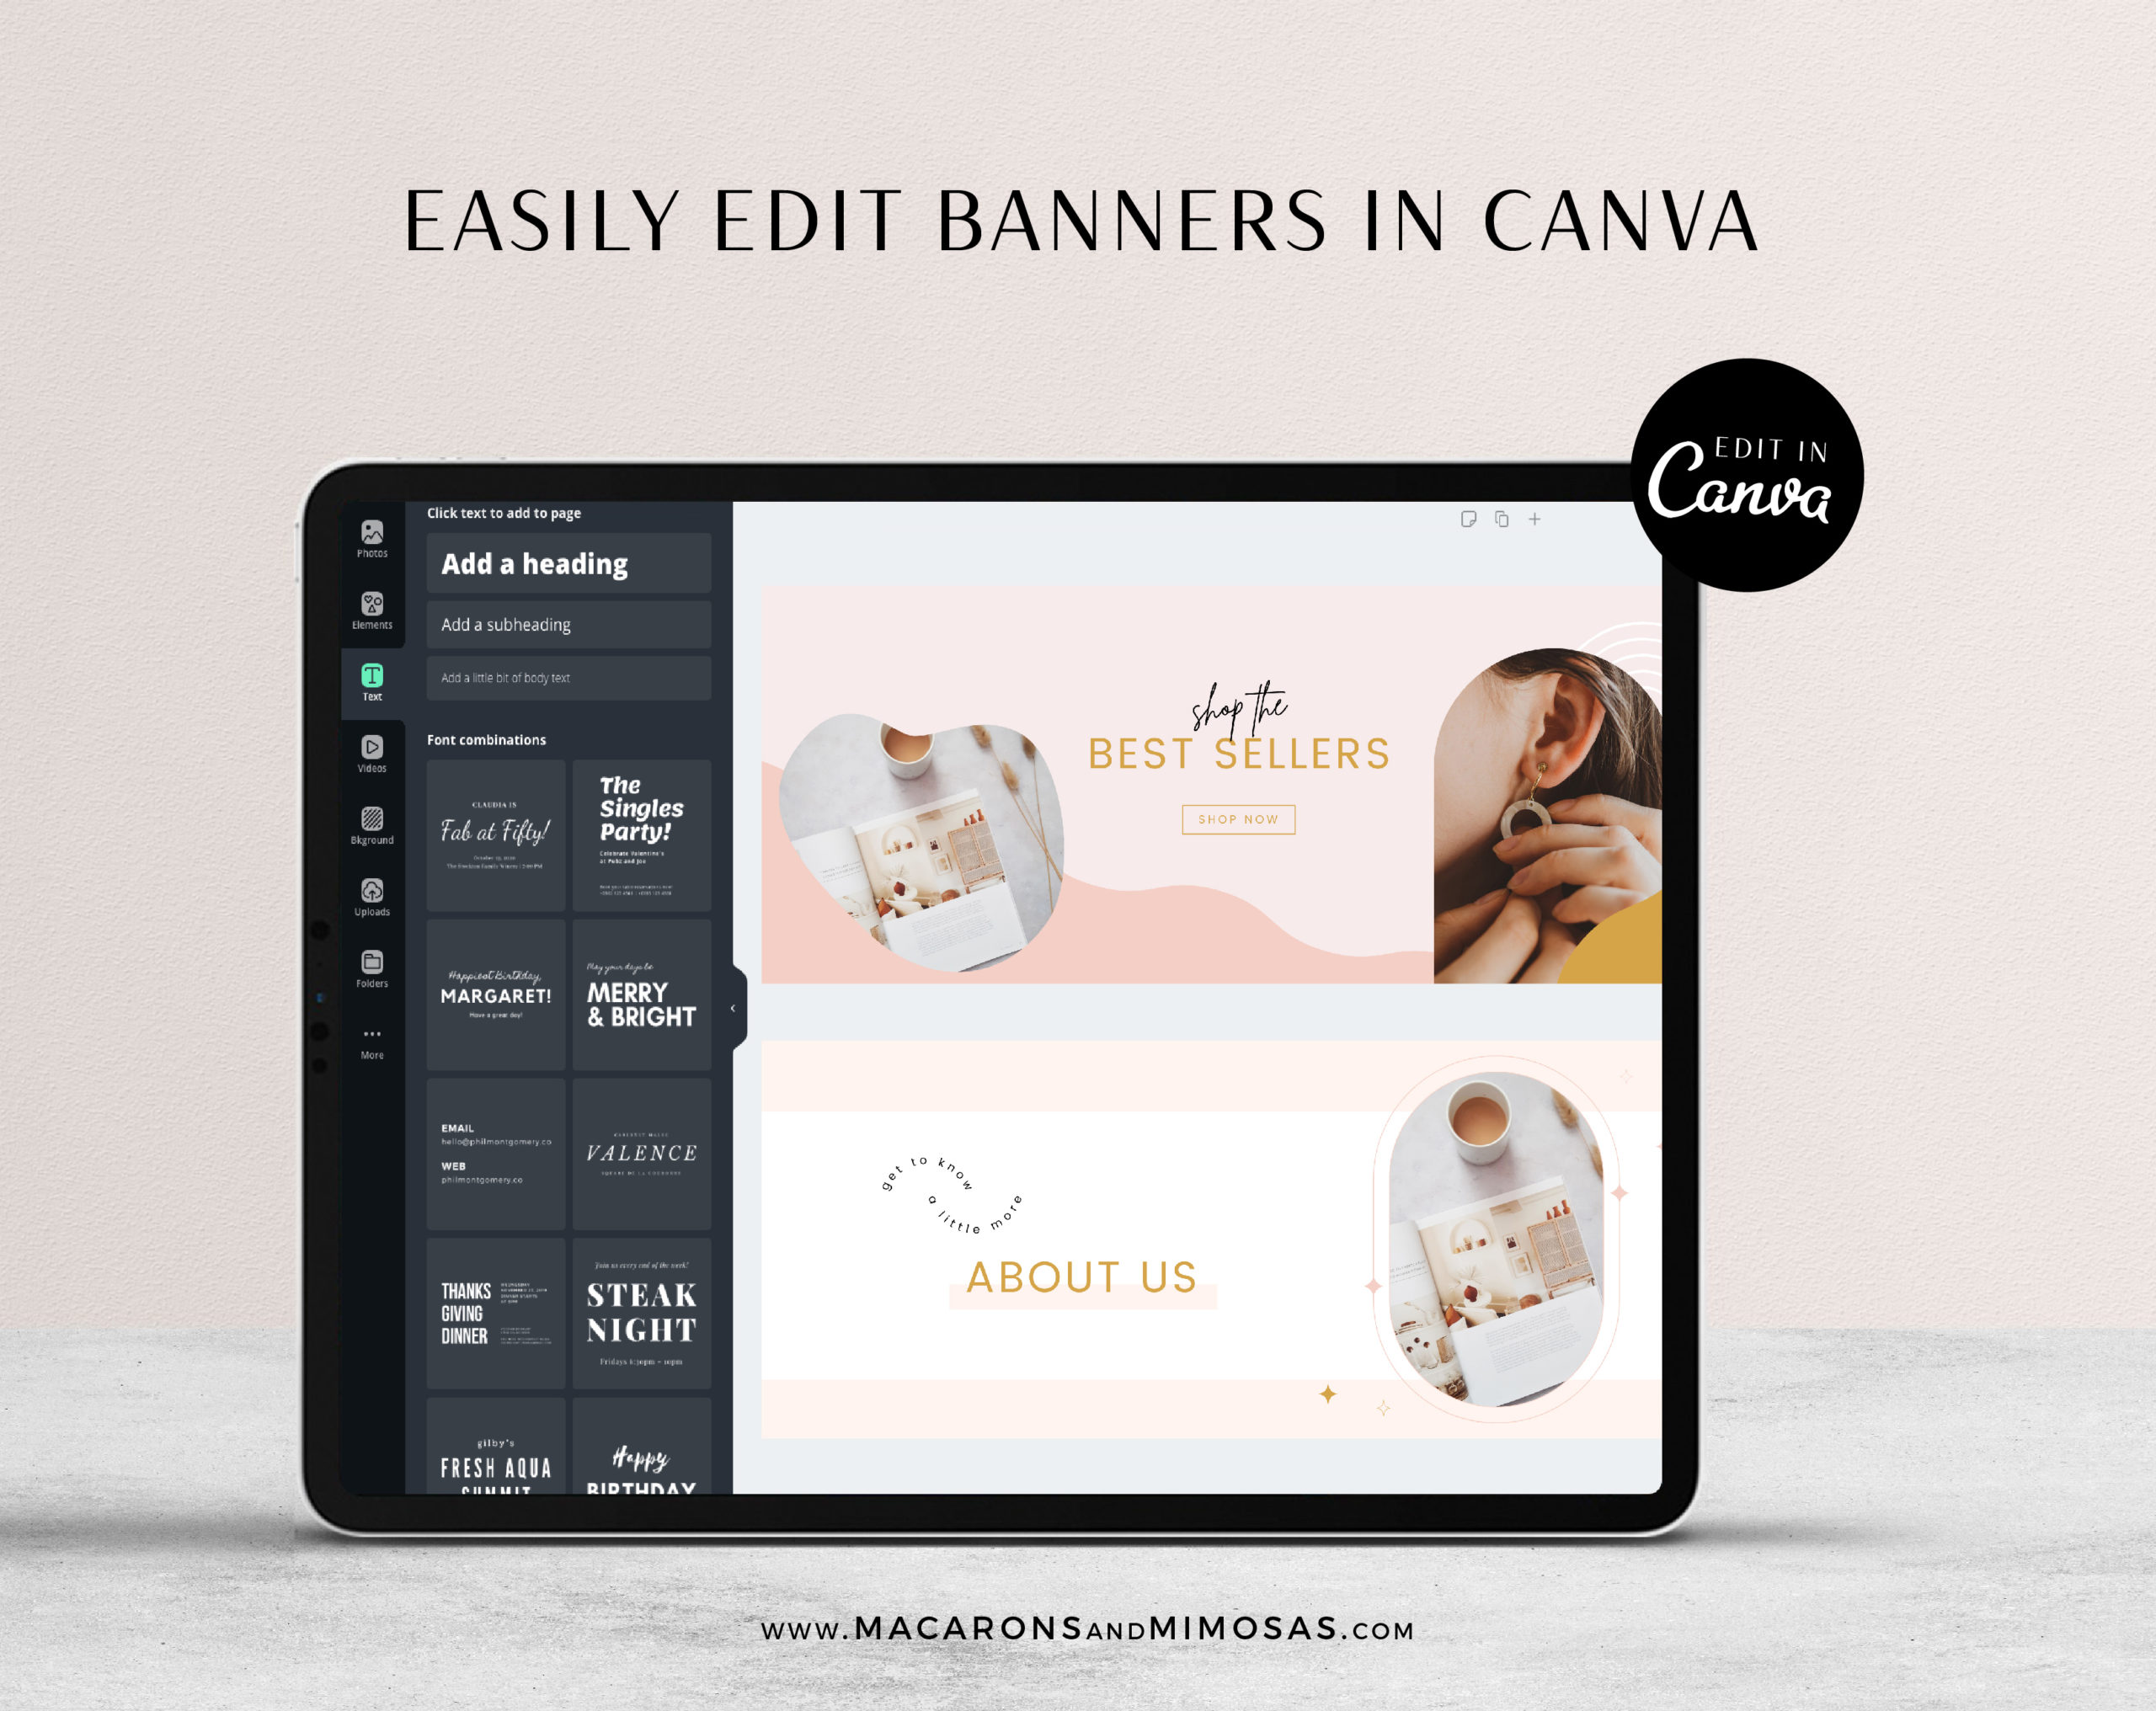 Boho Shopify Theme Template, Neutral Shopify Theme, Website Design Shopify 0S 2.0 Drag and Drop with Canva Banners